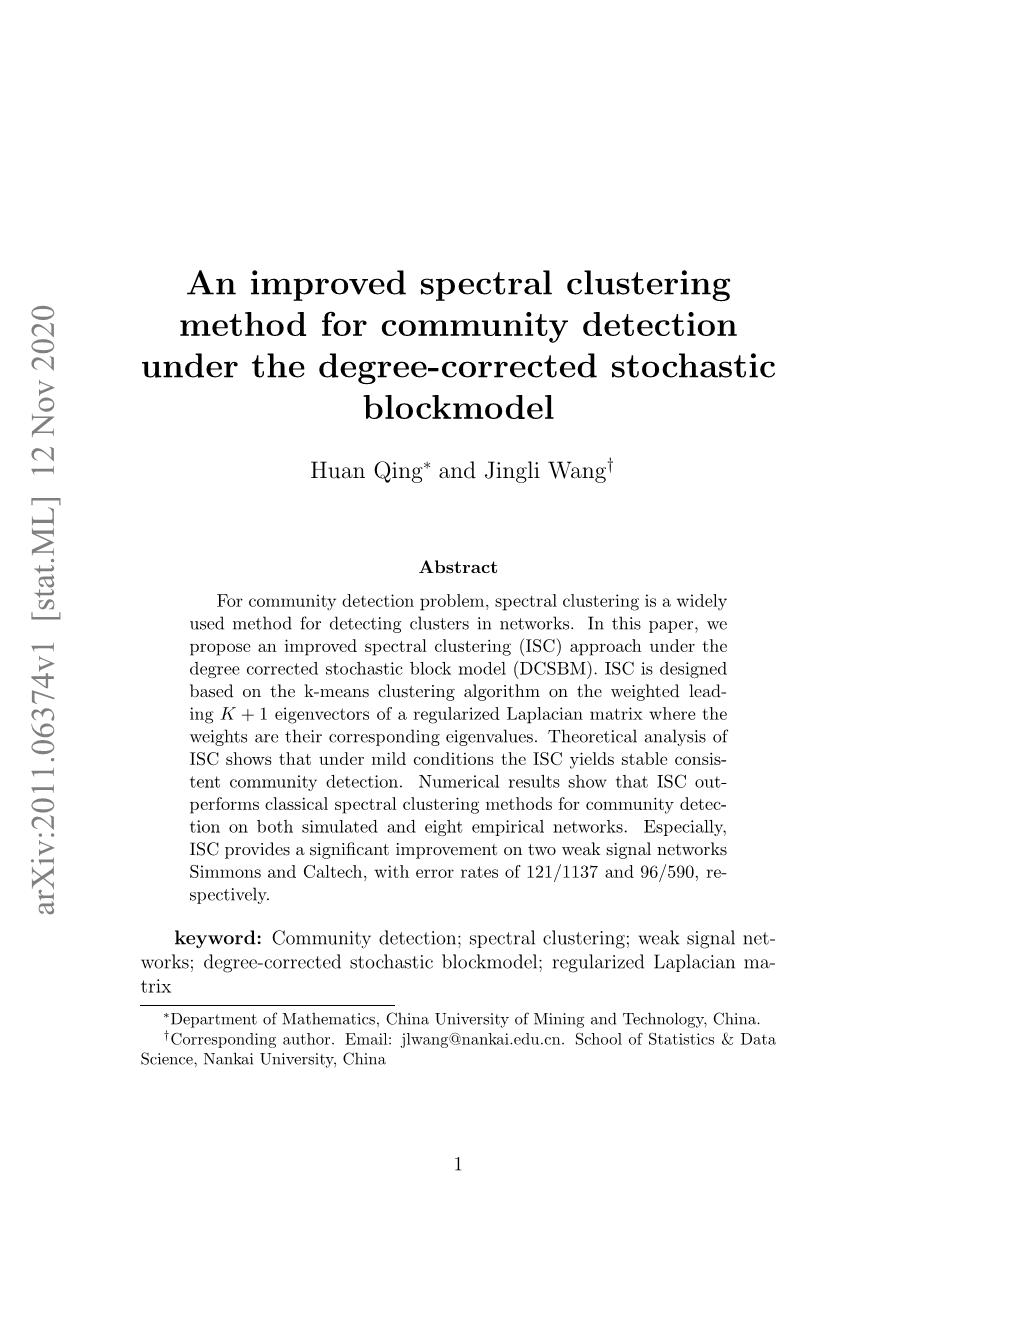 An Improved Spectral Clustering Method for Community Detection